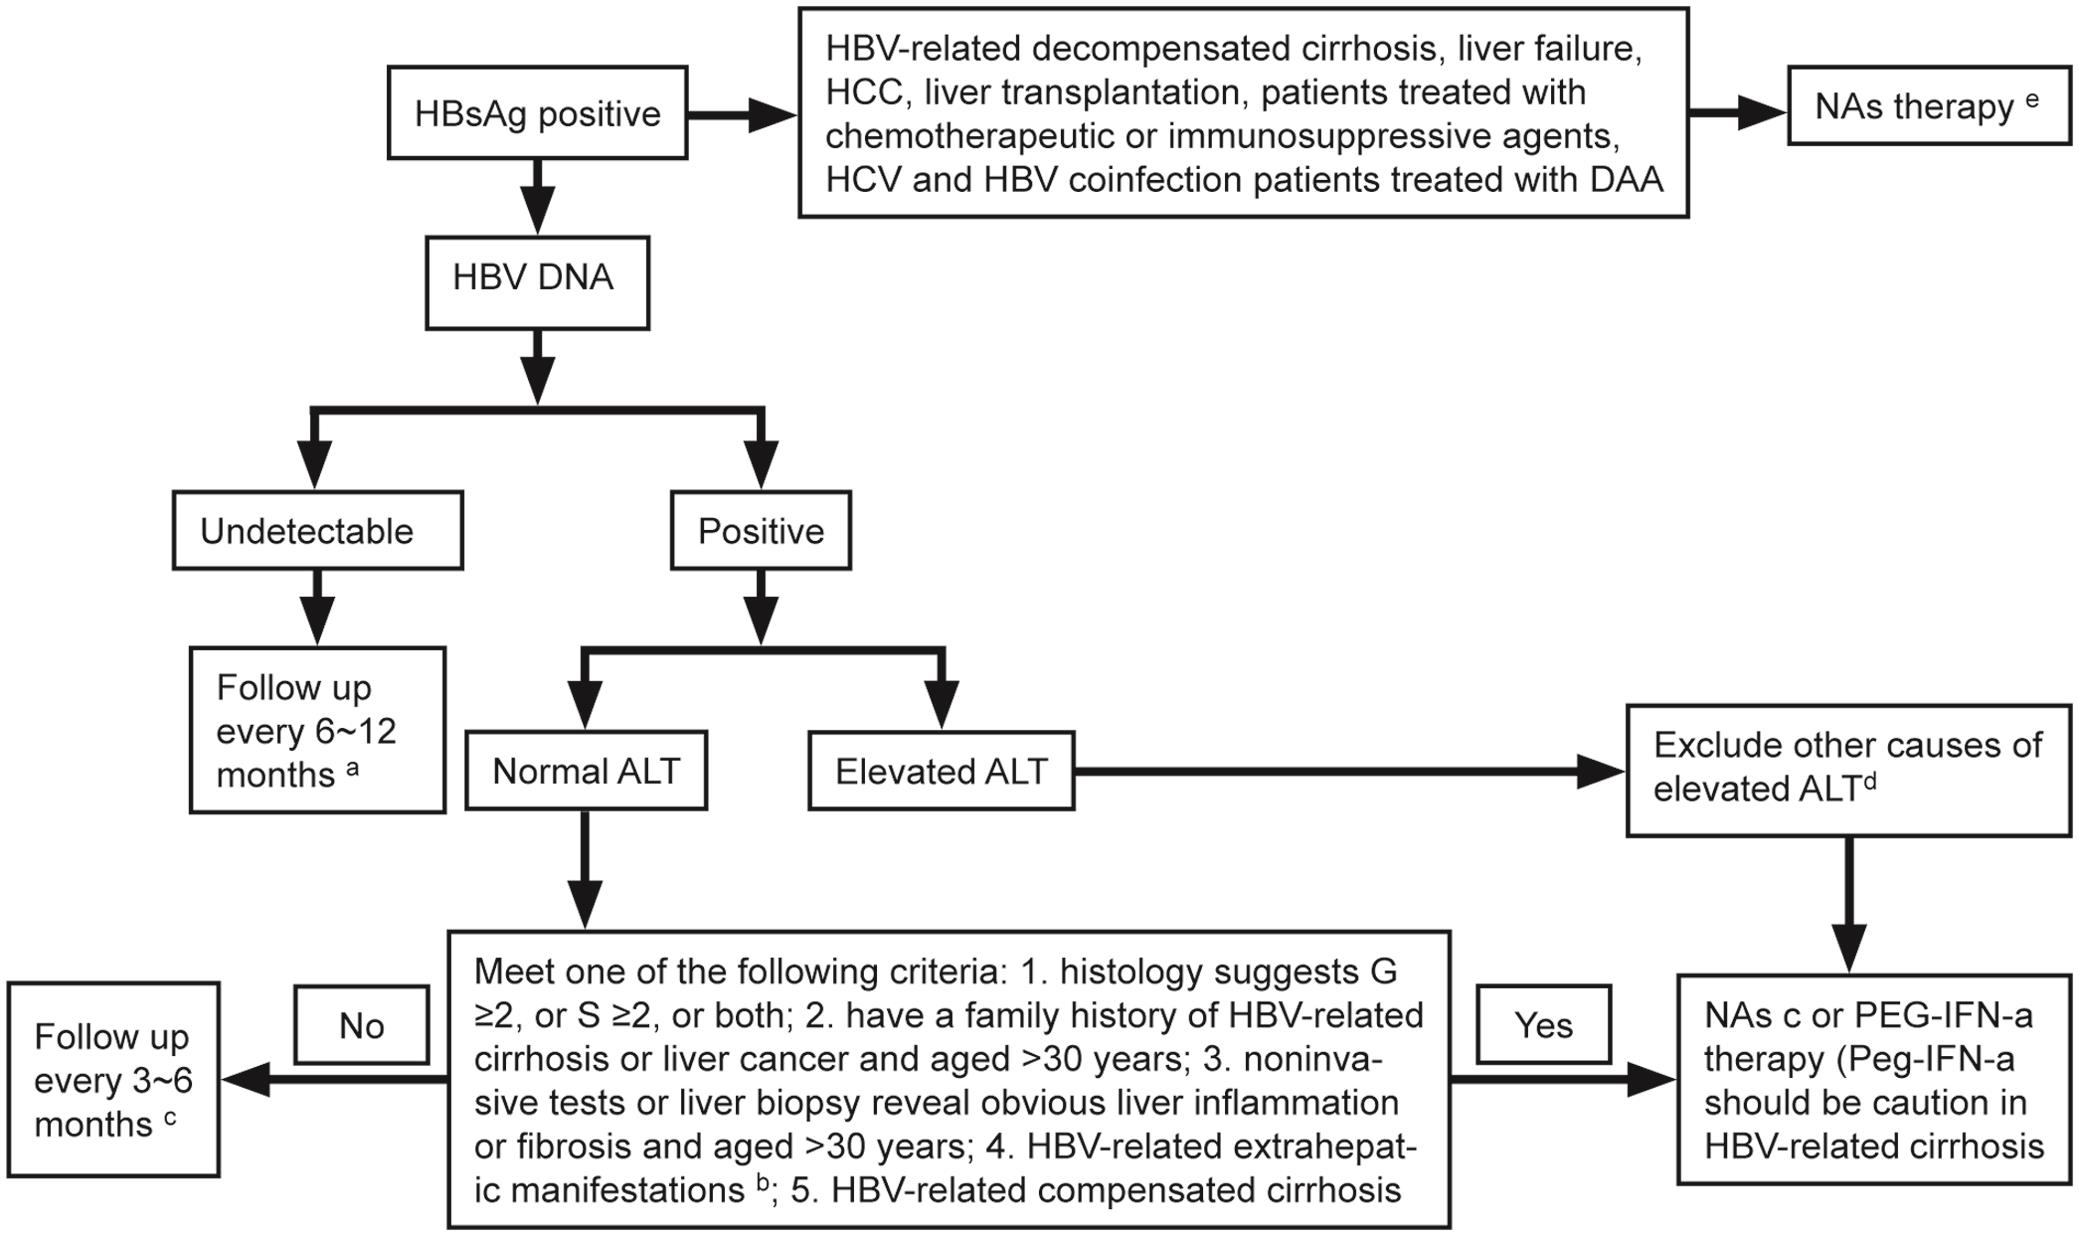 Flow chart of antiviral therapy for patients with chronic HBV infection.